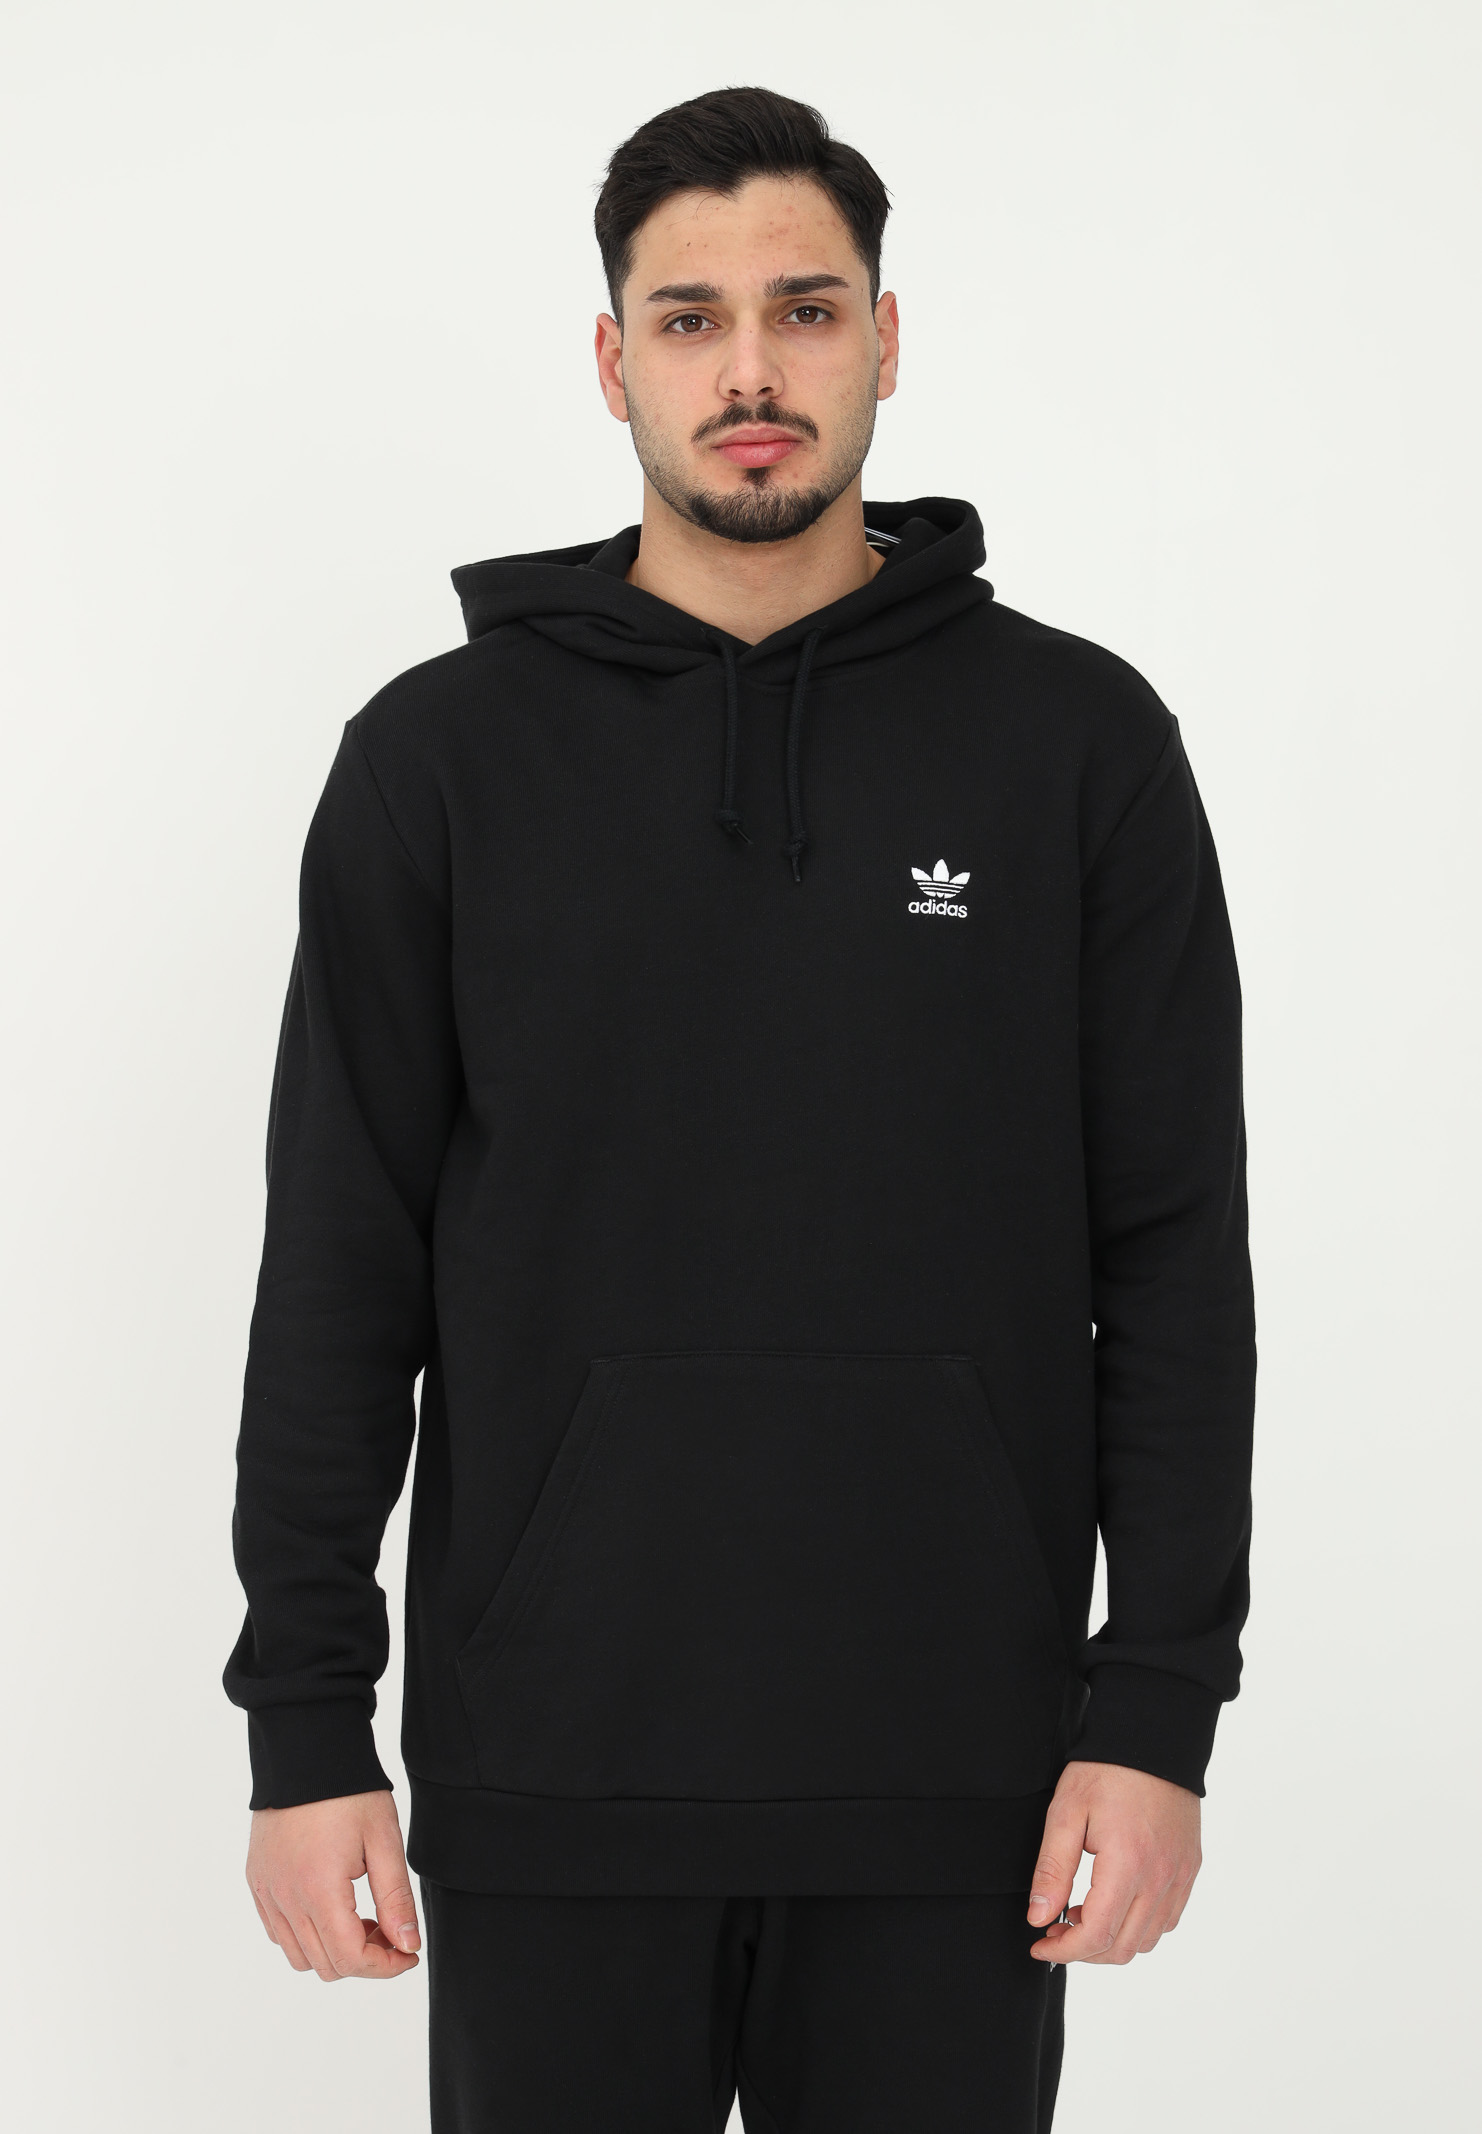 Black hoodie for men and women with trefoil logo embroidery ADIDAS | FM9956.